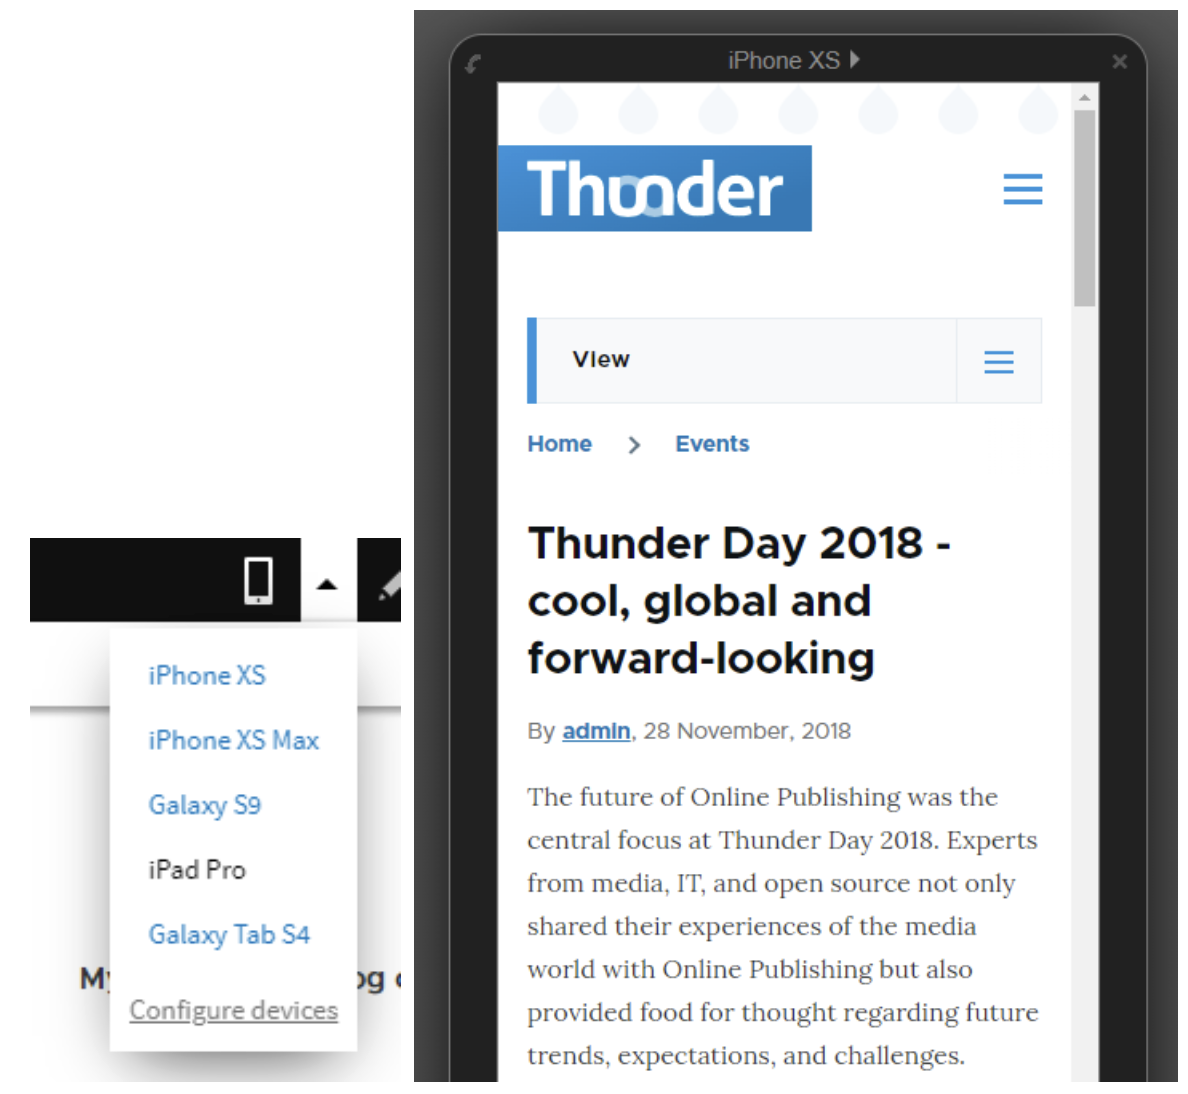 Mobile preview in CMS Editor lets us see how the article presents itself on smartphones or tablets.